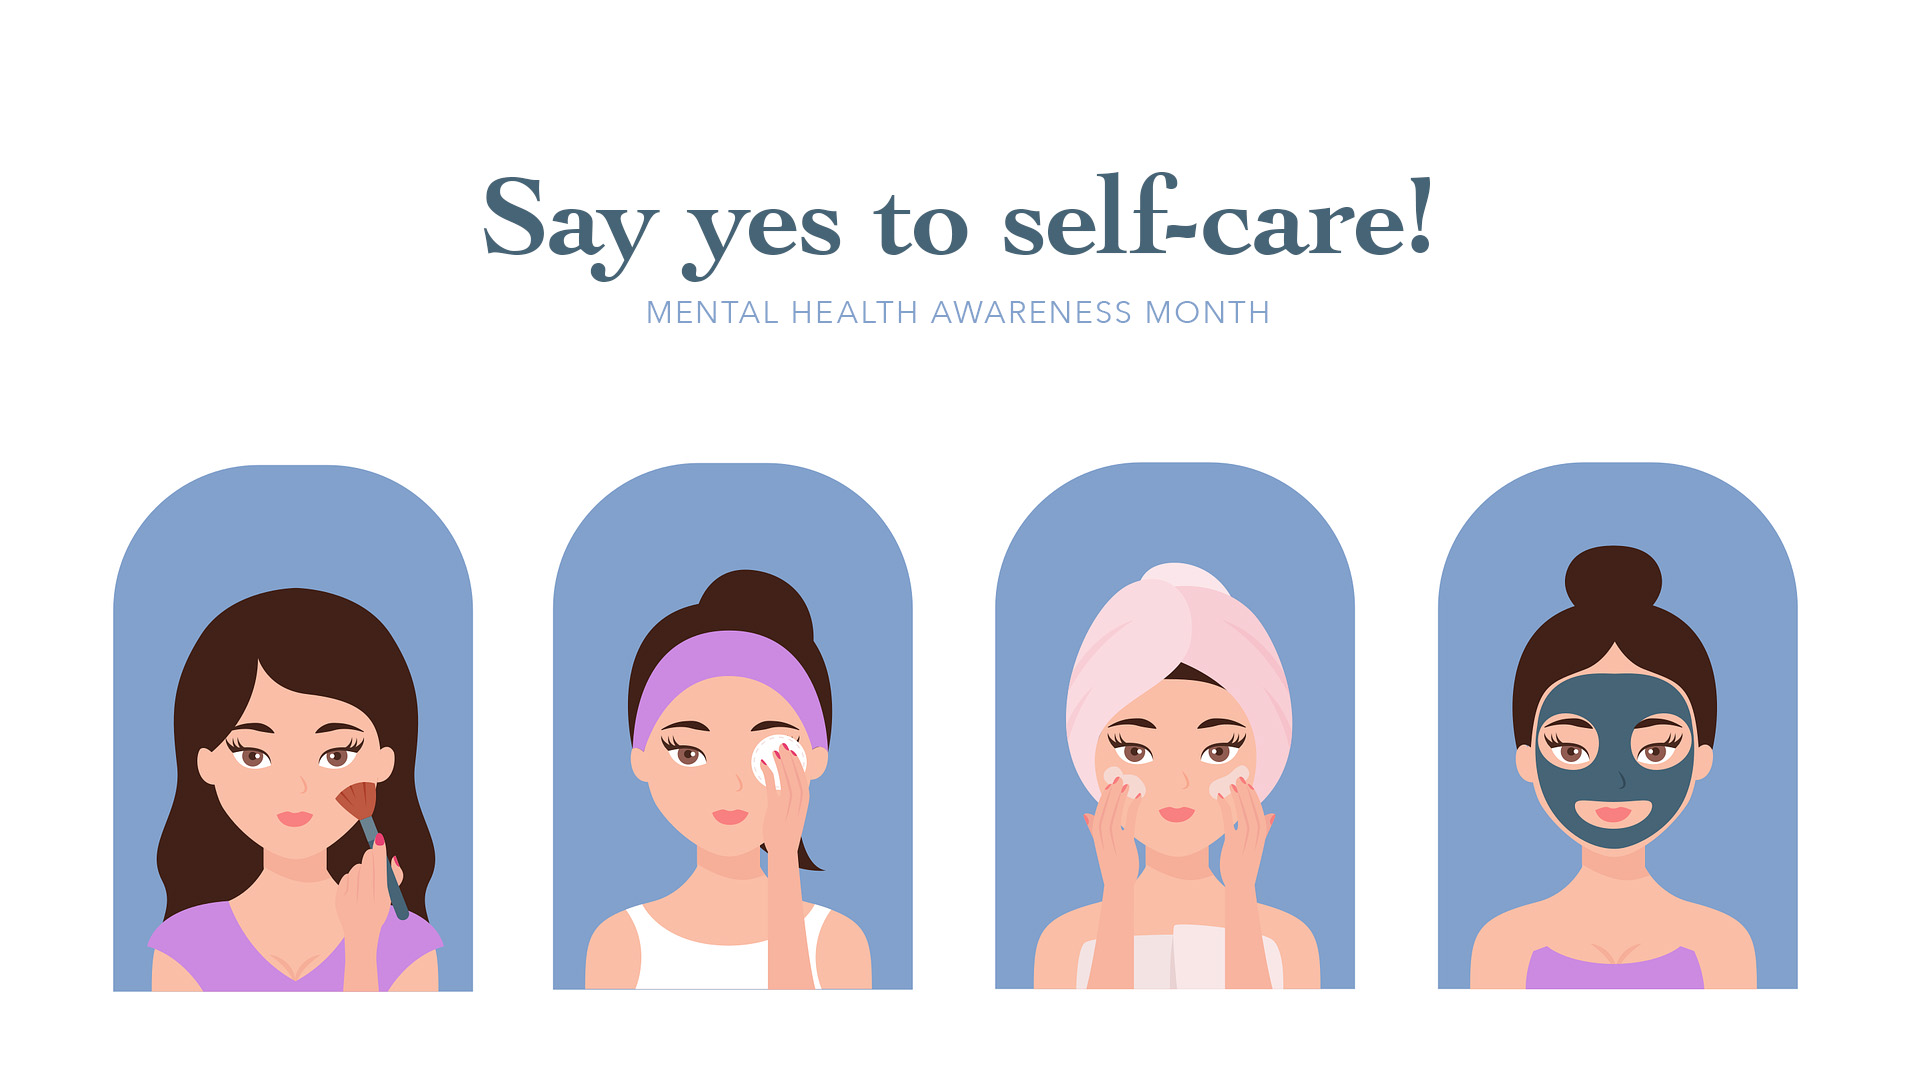 White background with 4 different girls faces in these little blue arches spanned across the bottom of the graphic. The girls appear to be pampering themselves. putting on makeup, wiping makeup off, scrubbing their face, and the last on has a face mask on. At the top of the image text reads Say yes to self-care! Mental Health awareness month.